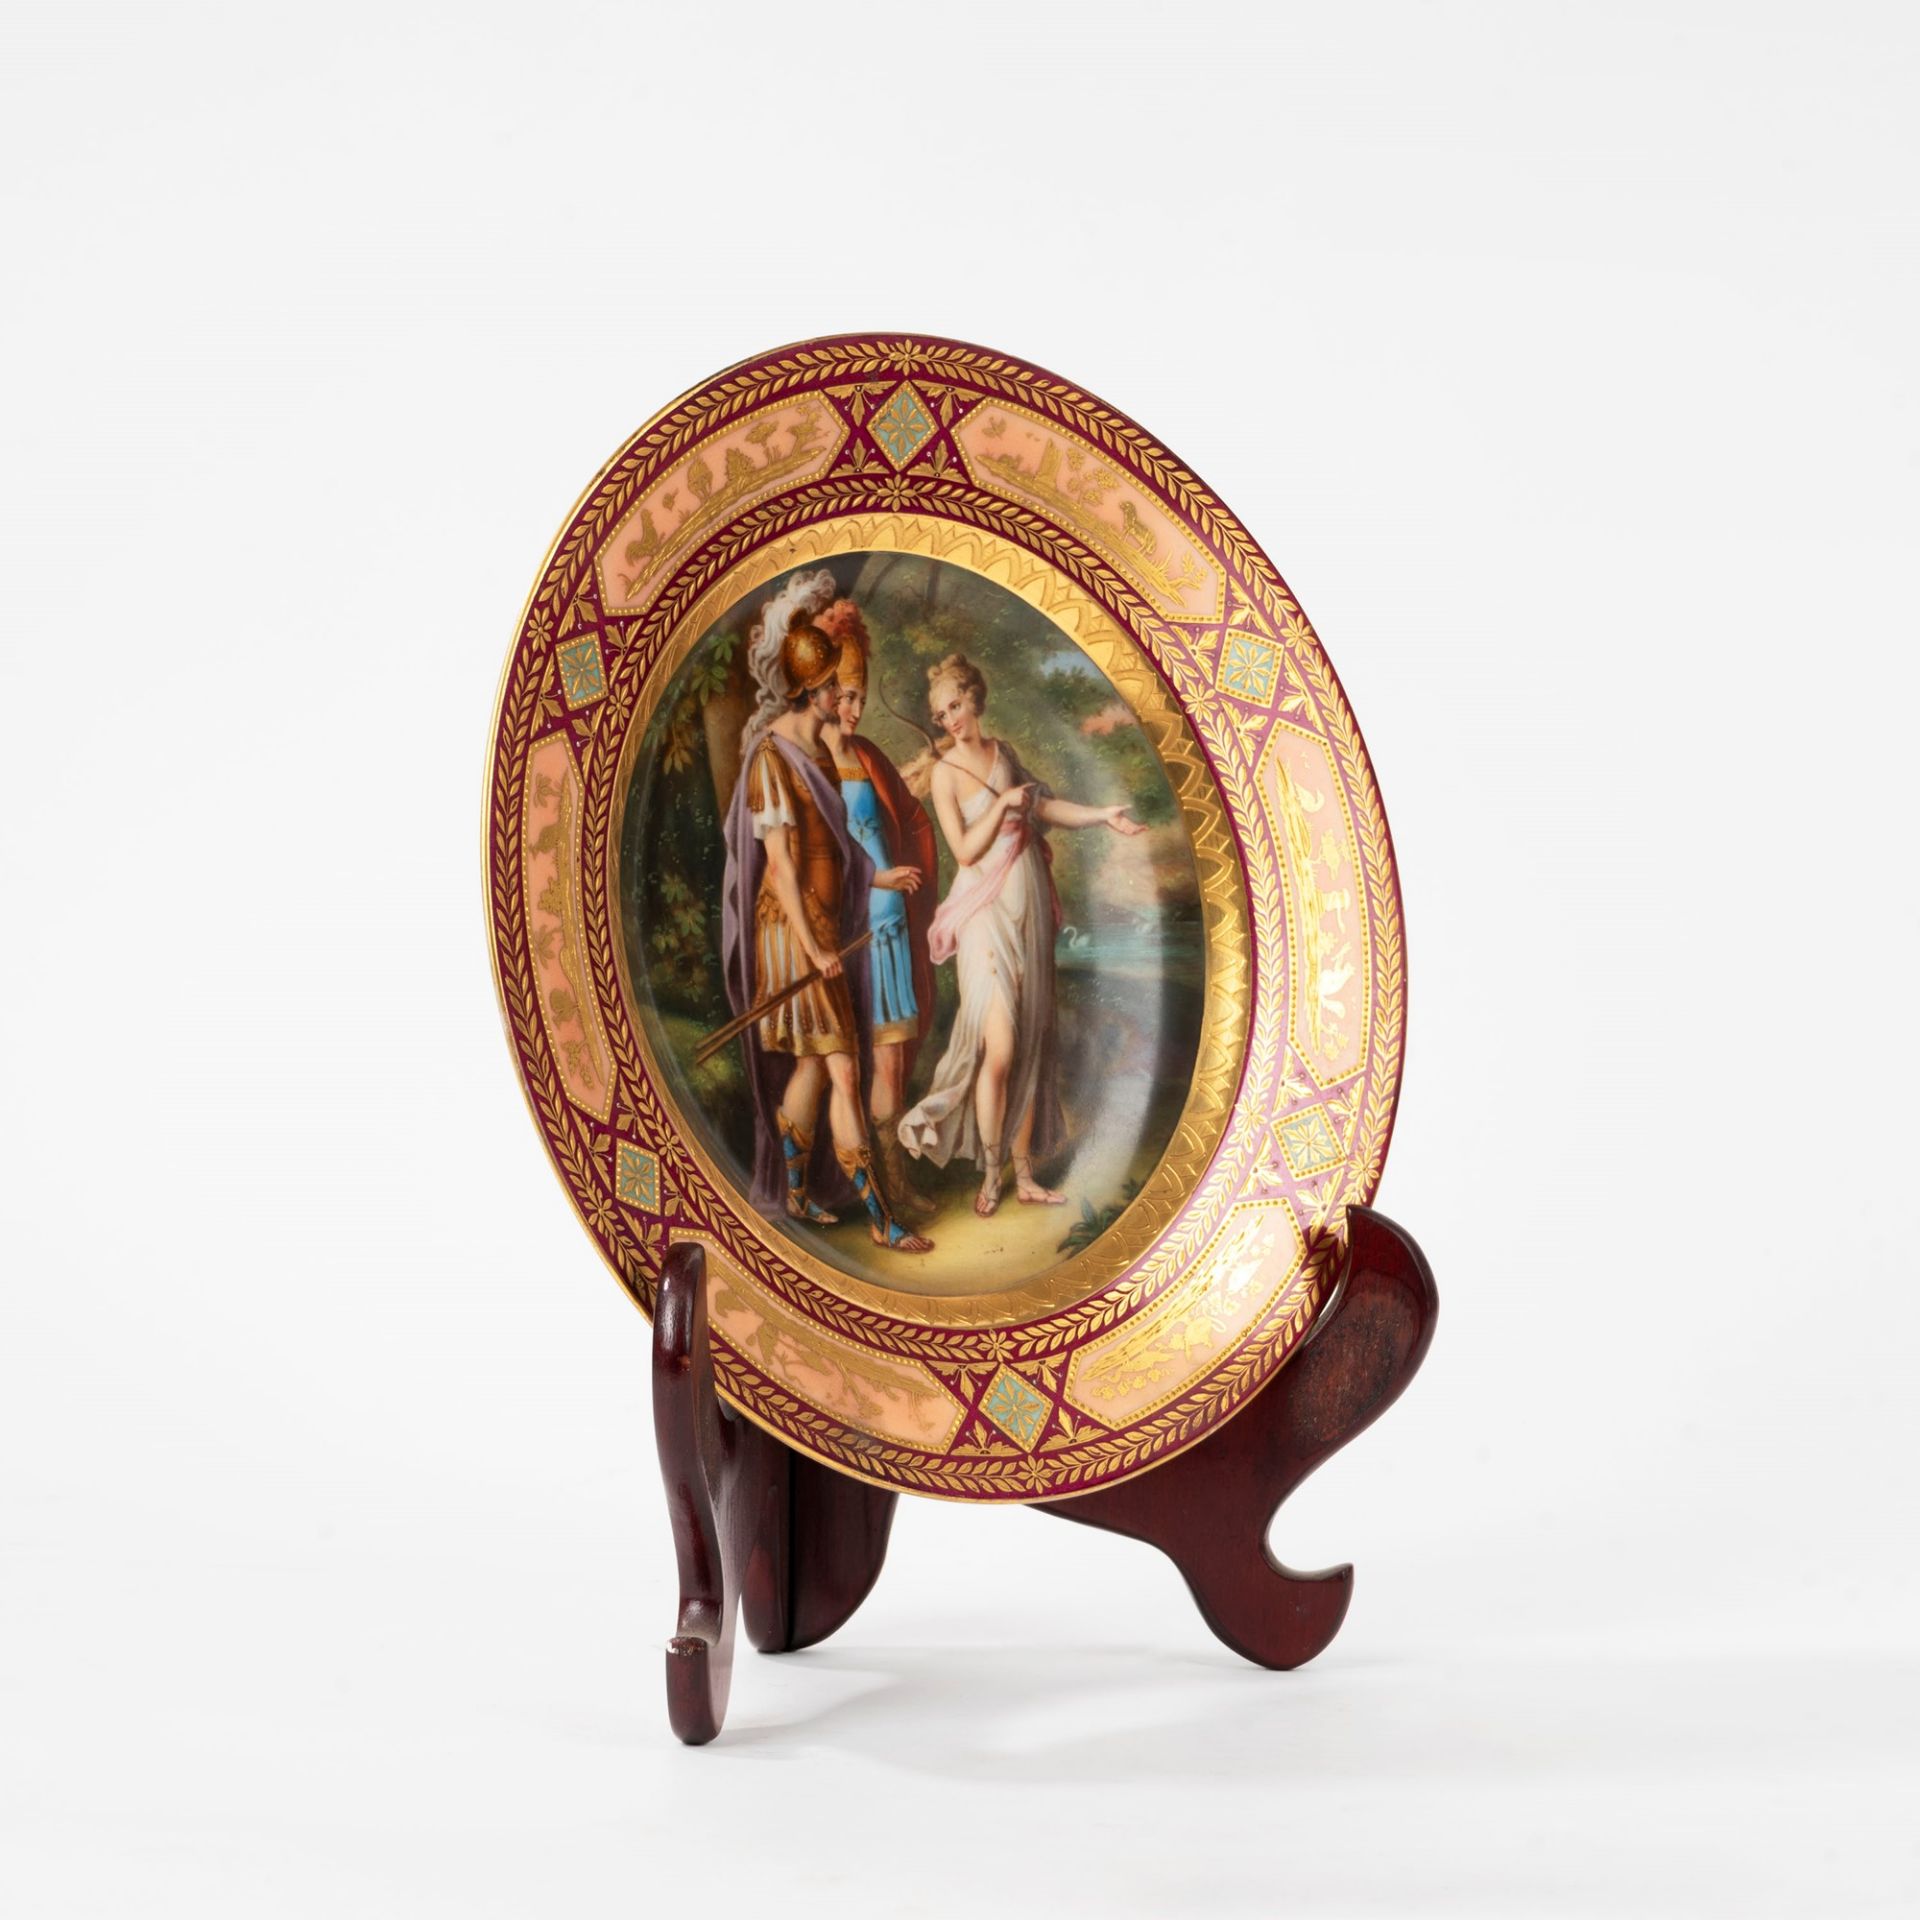 Polychrome porcelain plate representing Aeneas on the road to Carthage, Vienna, 19th century